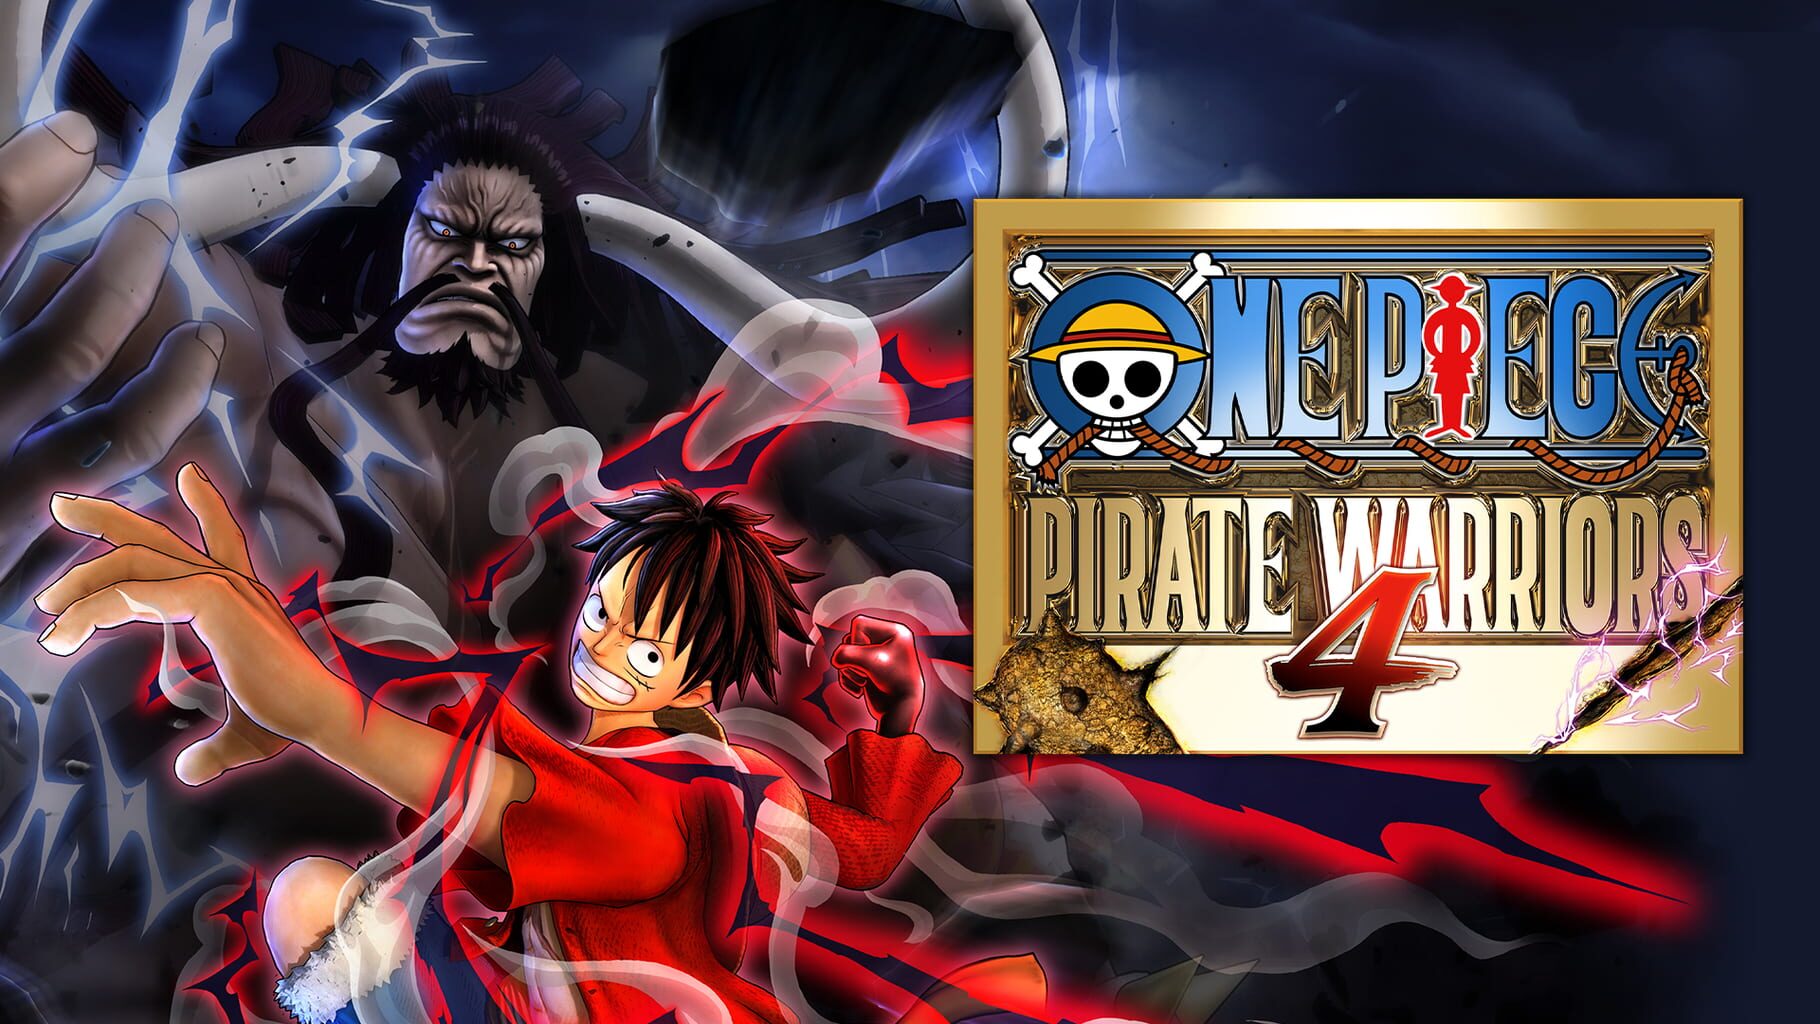 Artwork for One Piece: Pirate Warriors 4